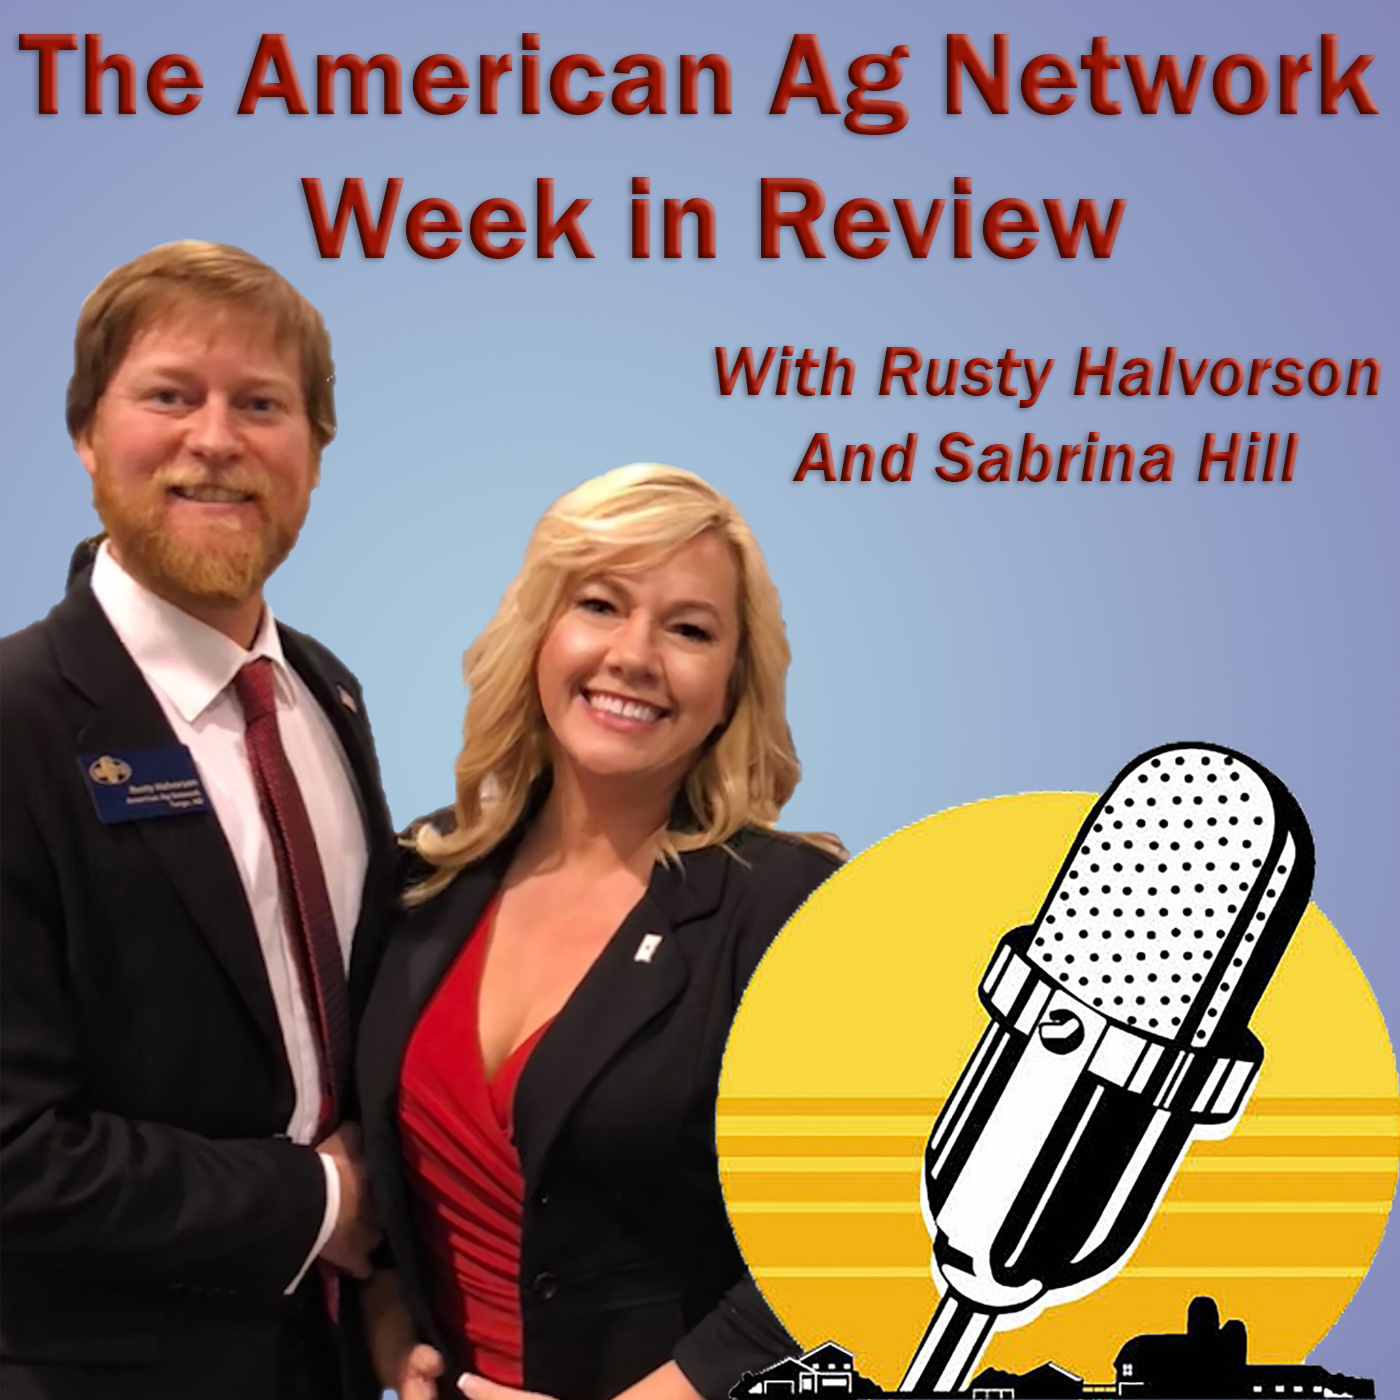 American Ag Network Week in Review for April 21